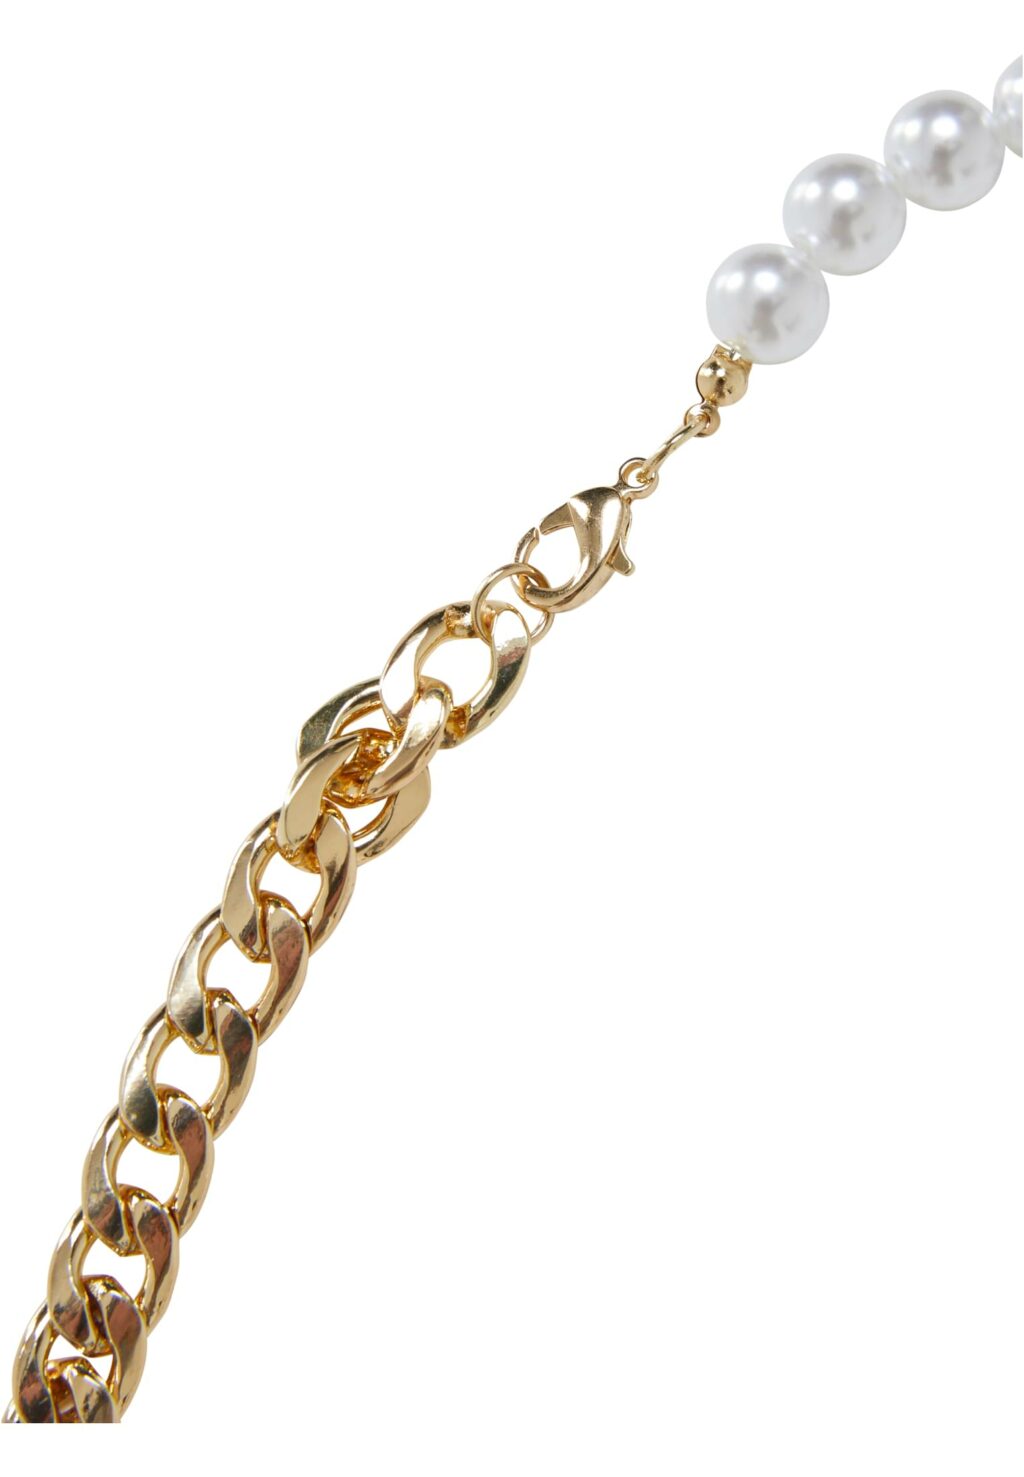 Half Pearl Exchangable Necklace 2-Pack gold/gunmetal one TB6513